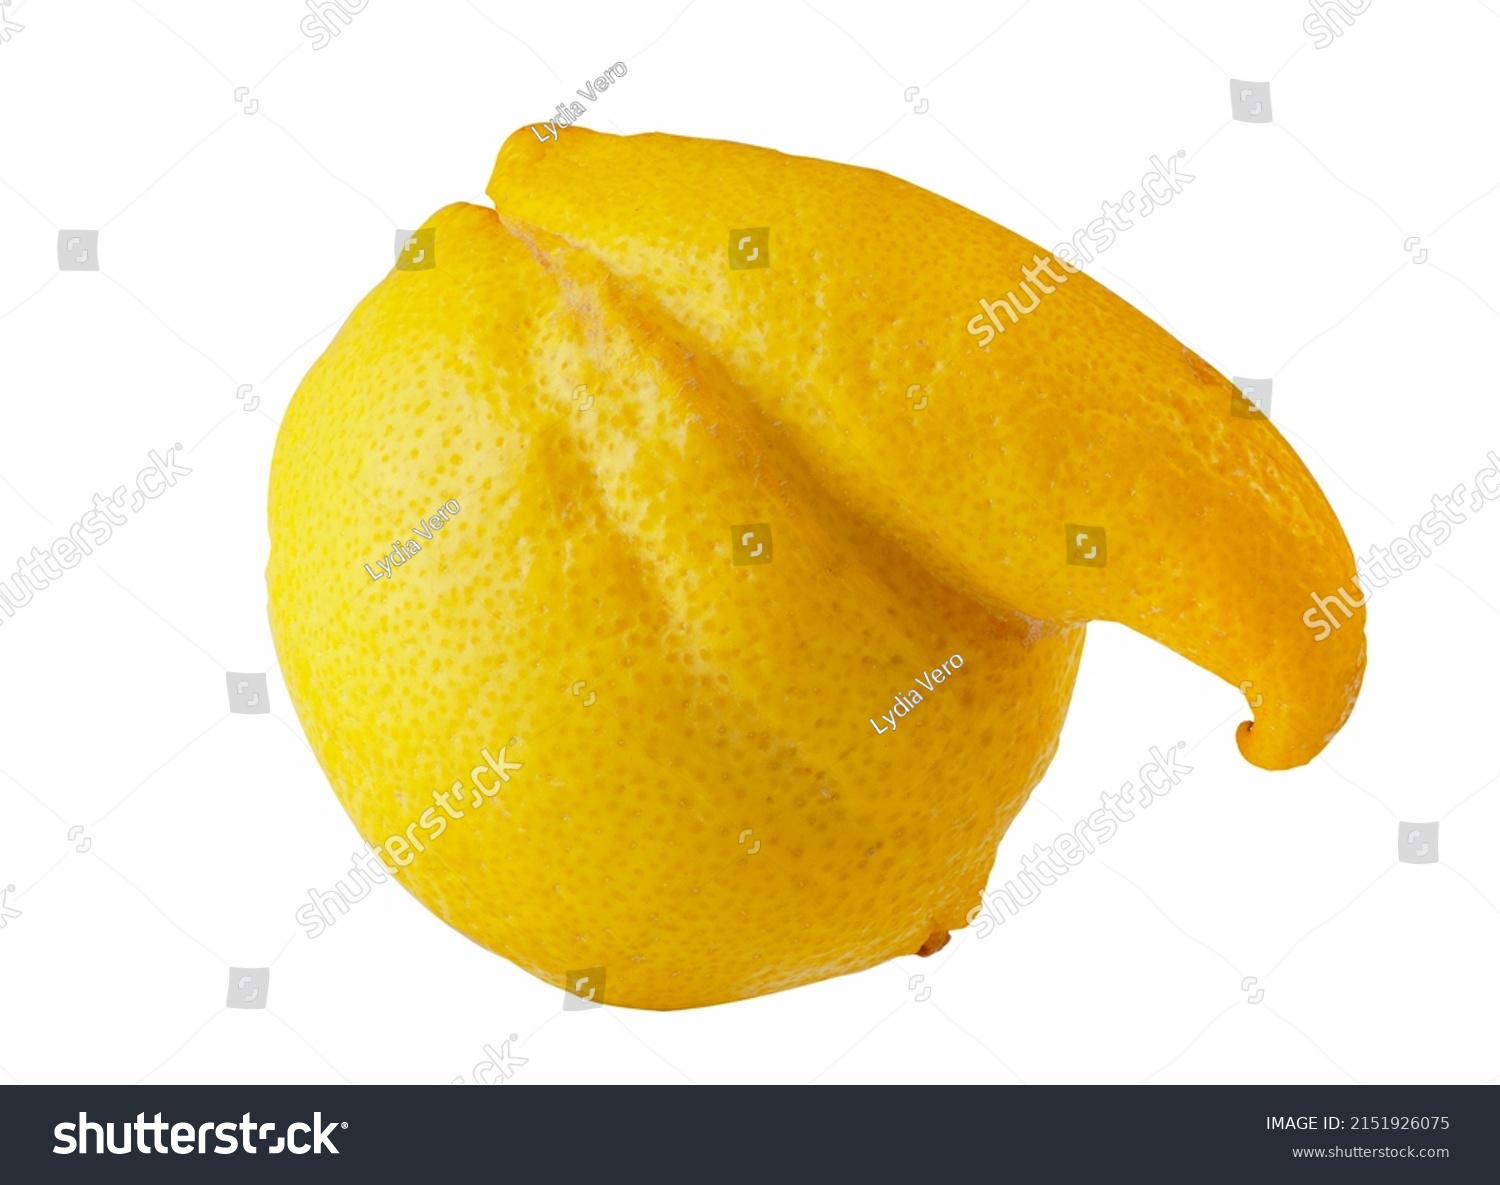 Ugly food, funny vegetable shape concept. Funny shape lemon on a white background. Clipping path #2151926075